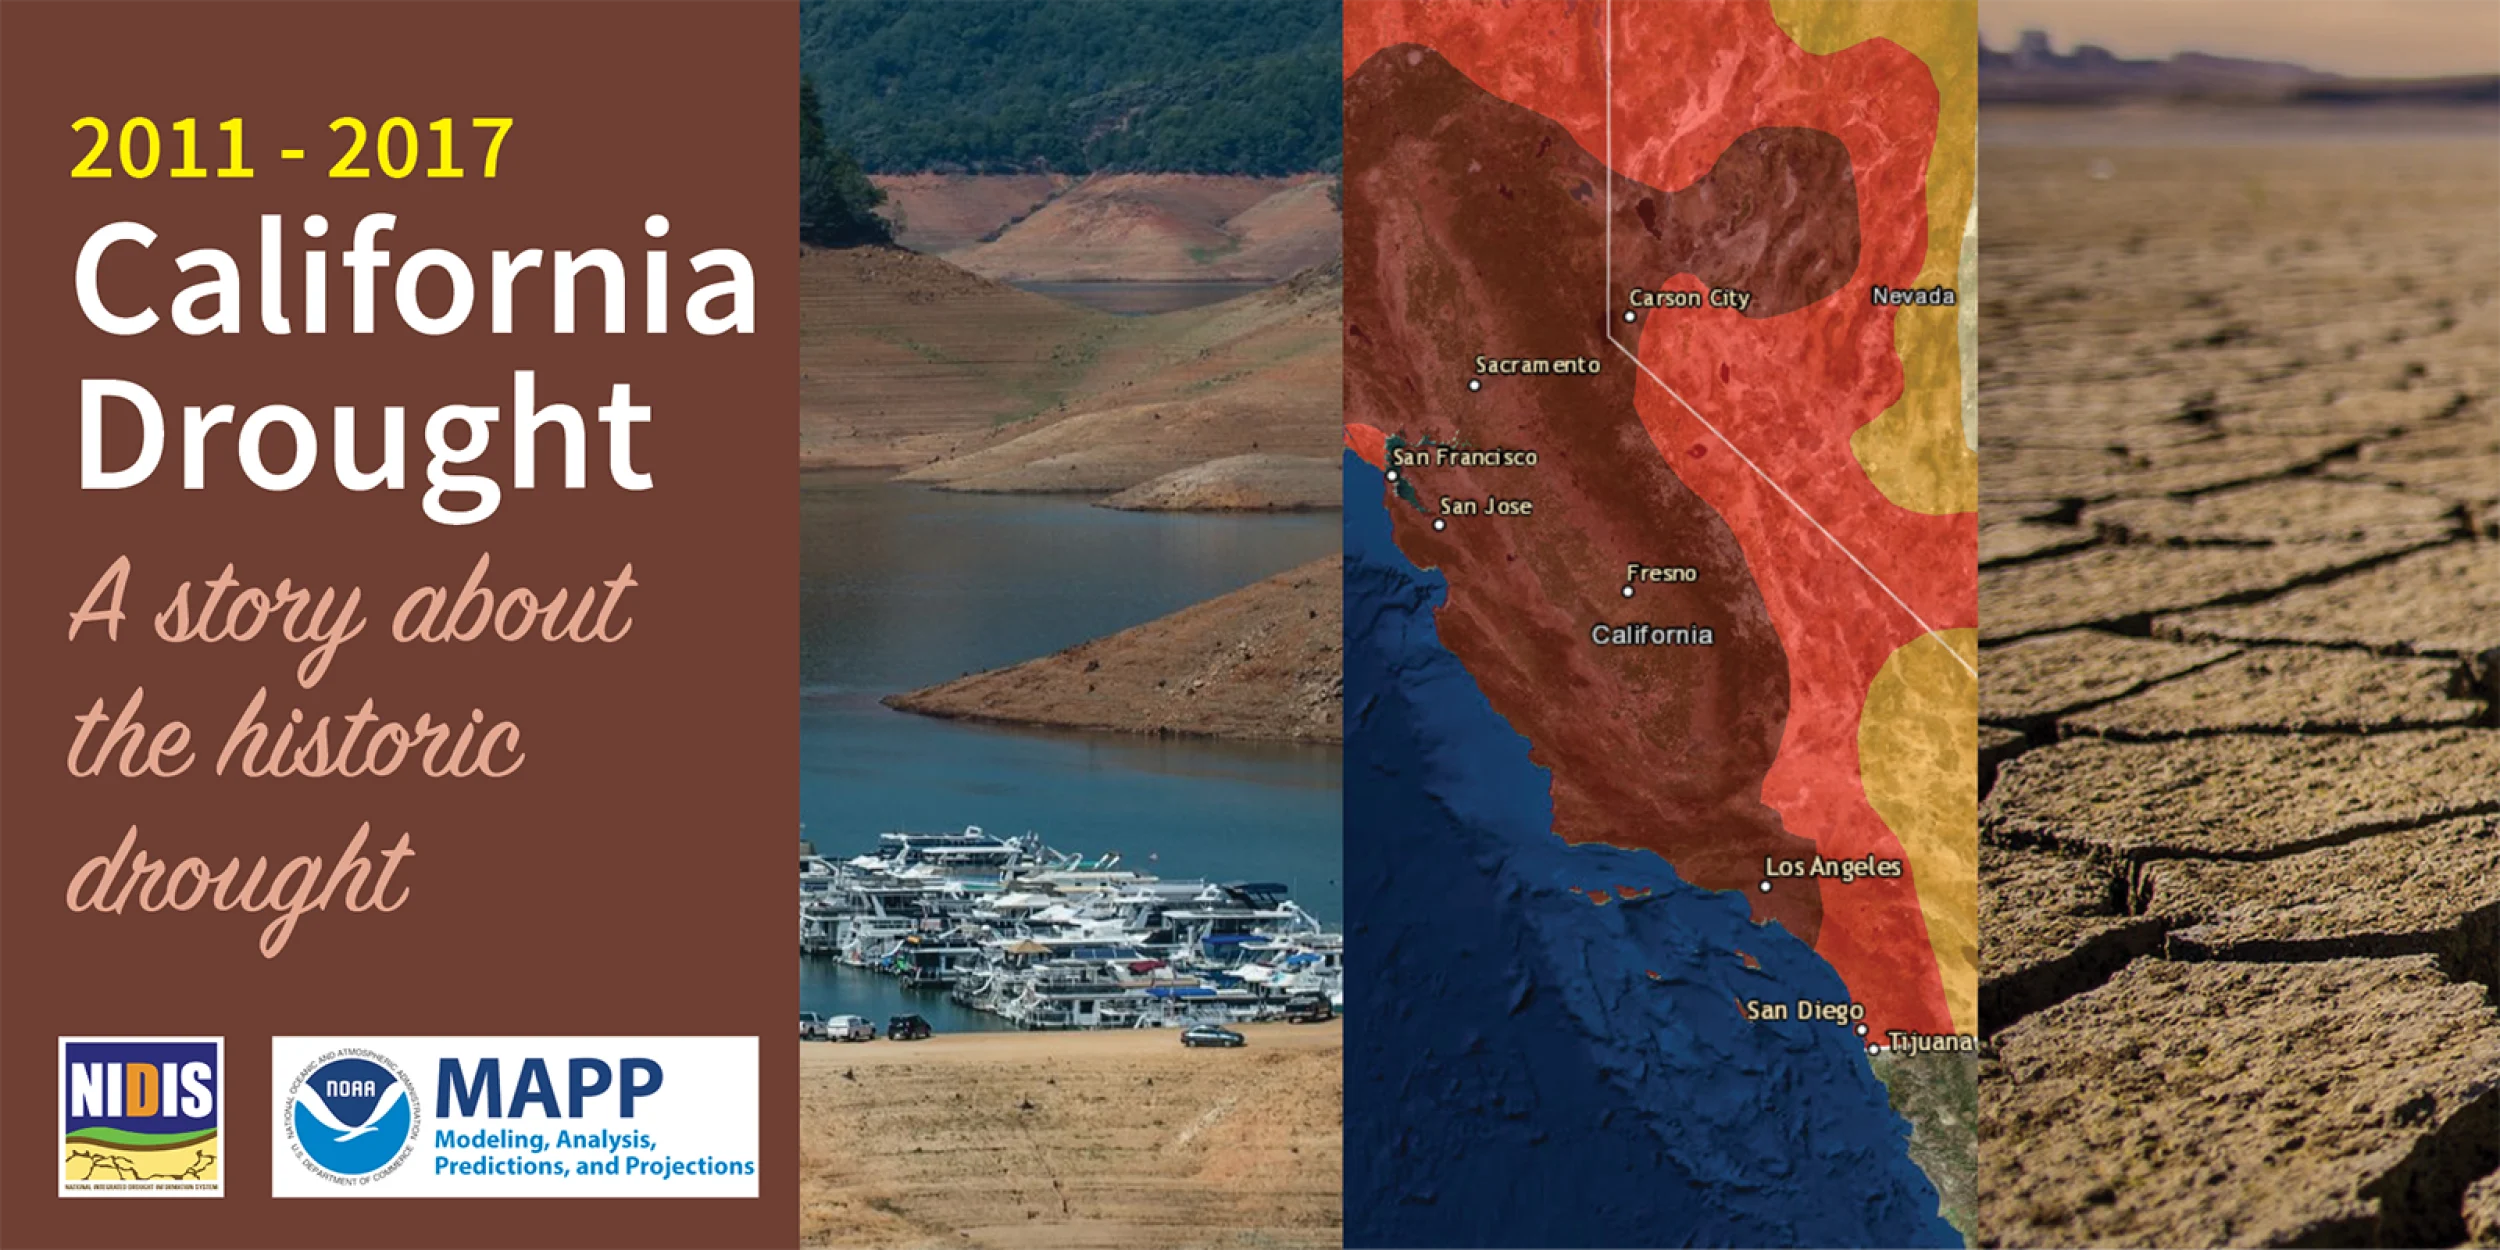 MAPP-NIDIS California Story Map
How did the 2011-2017 drought fit within California's history? The MAPP-NIDIS California Story Map will address this question, as well as describe the evolution of the drought, its complex causes, and implications for the future